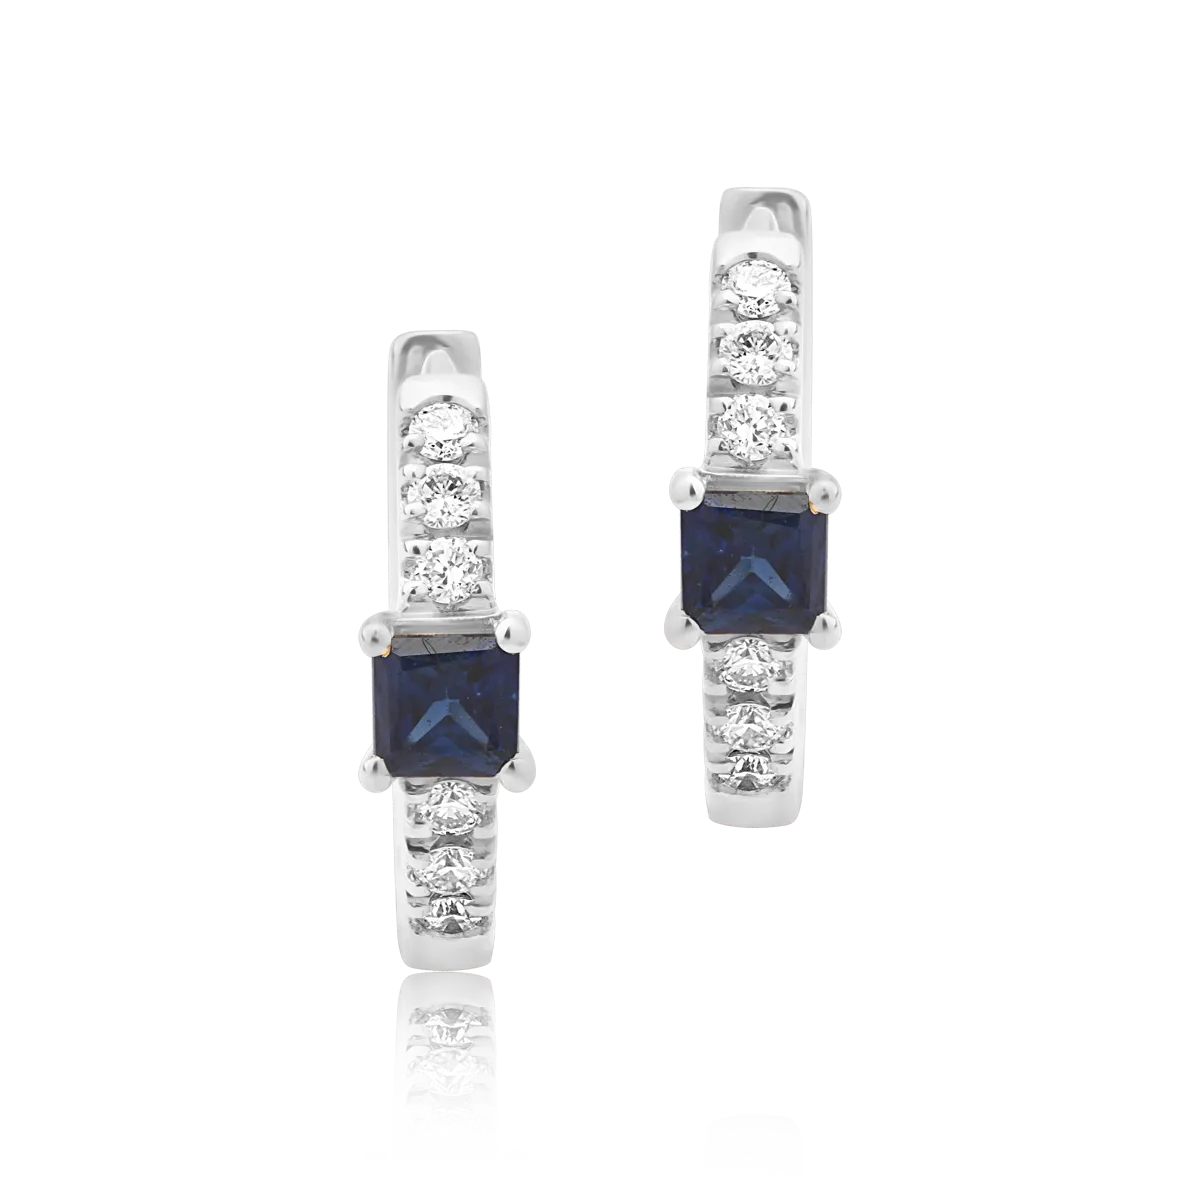 18K white gold earrings with 0.15ct sapphires and 0.06ct diamonds